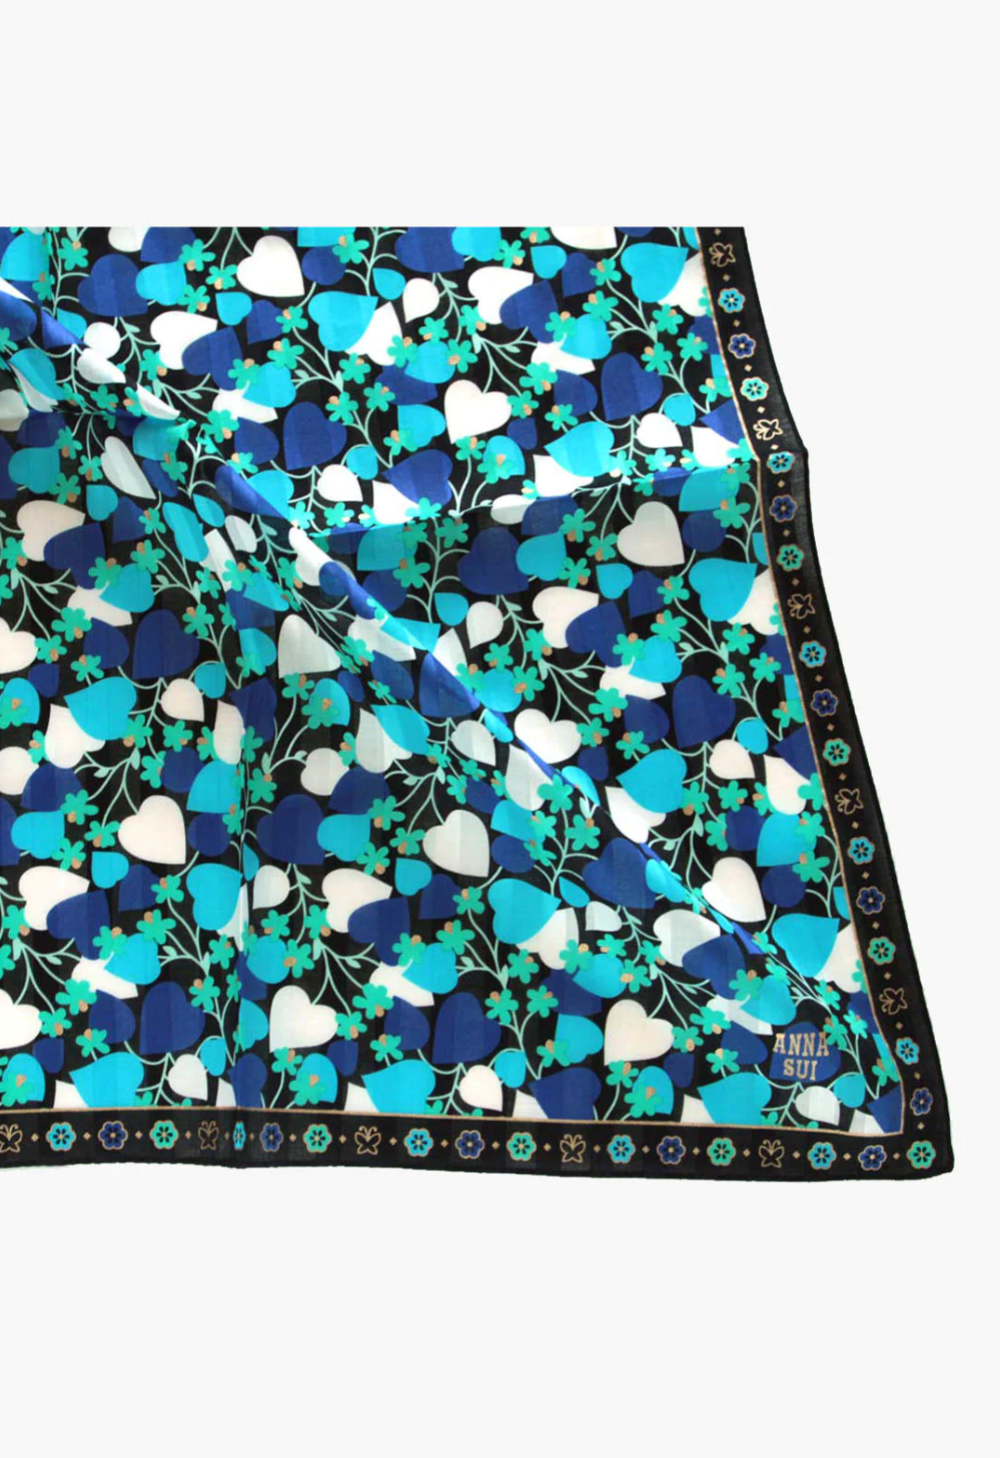 Cotton squared hue of blue Blooming Hearts Handkerchief printed color, Anna Sui label, black border